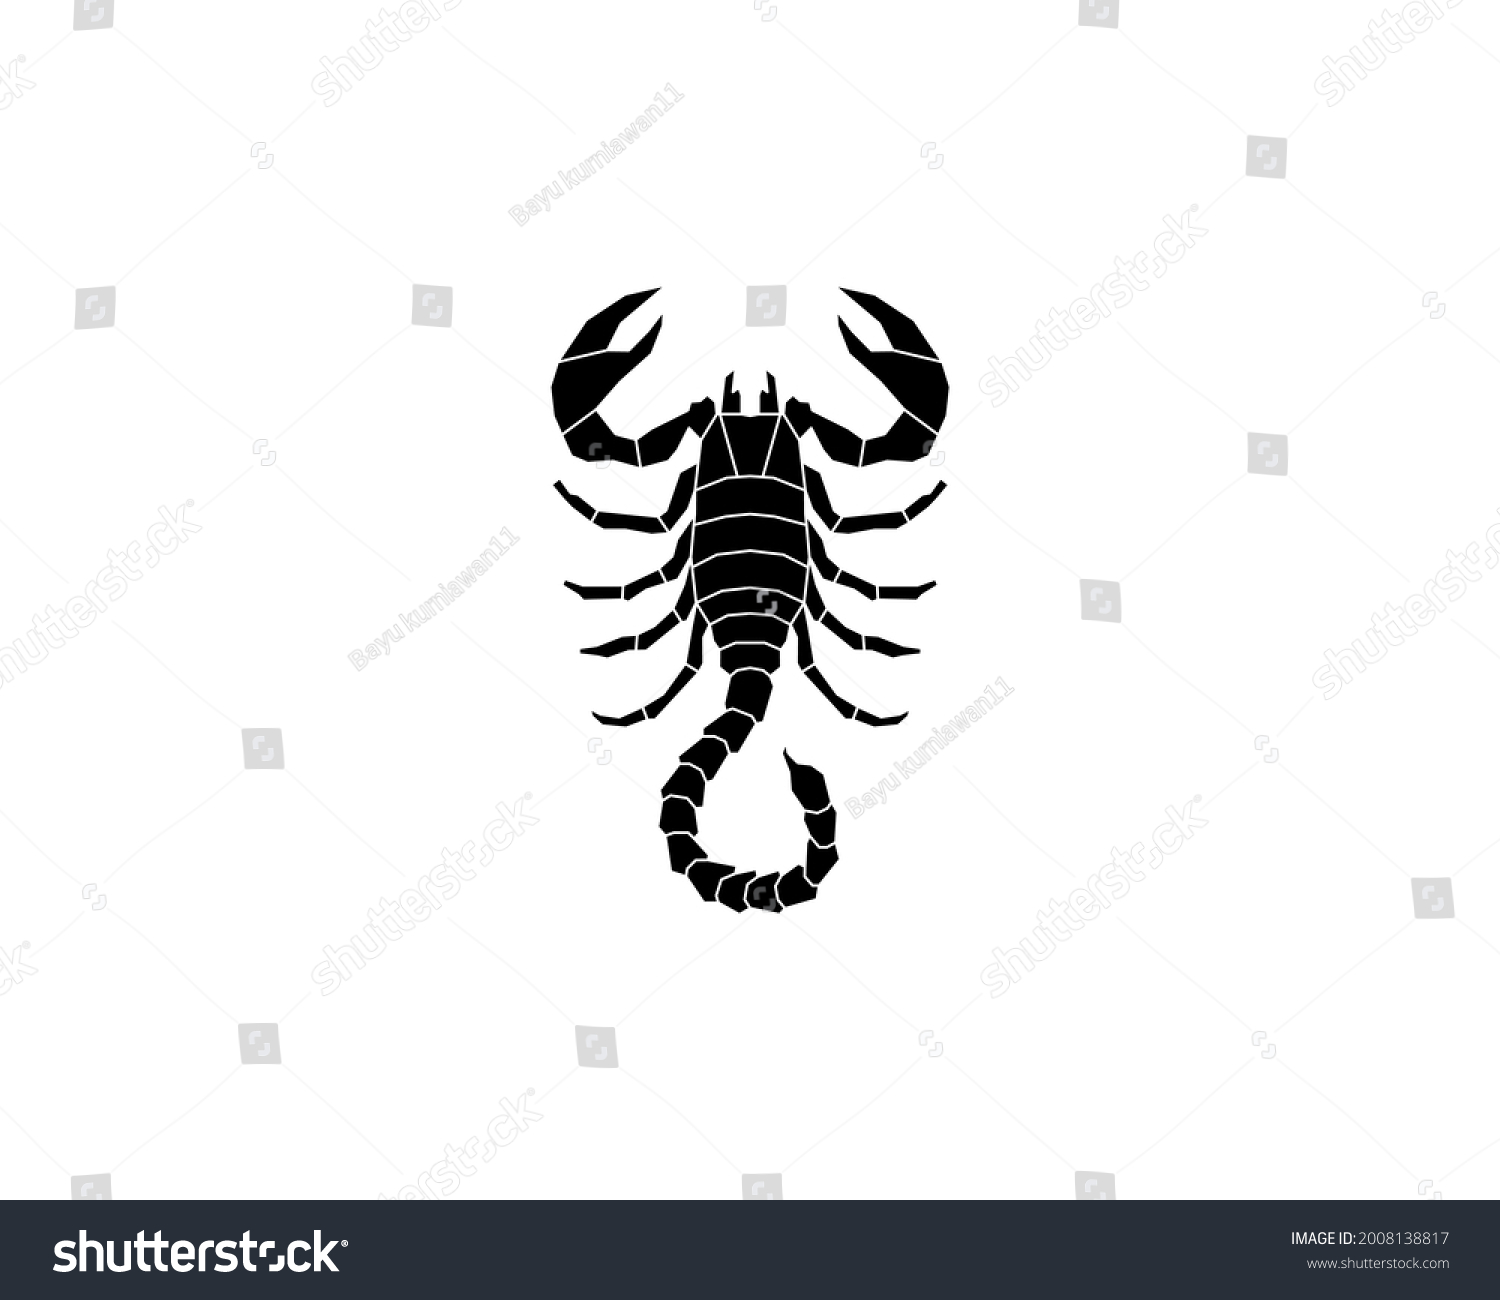 SVG of vector illustration of geometric scorpion logo, scorpion mascot icon suitable for stickers and more svg